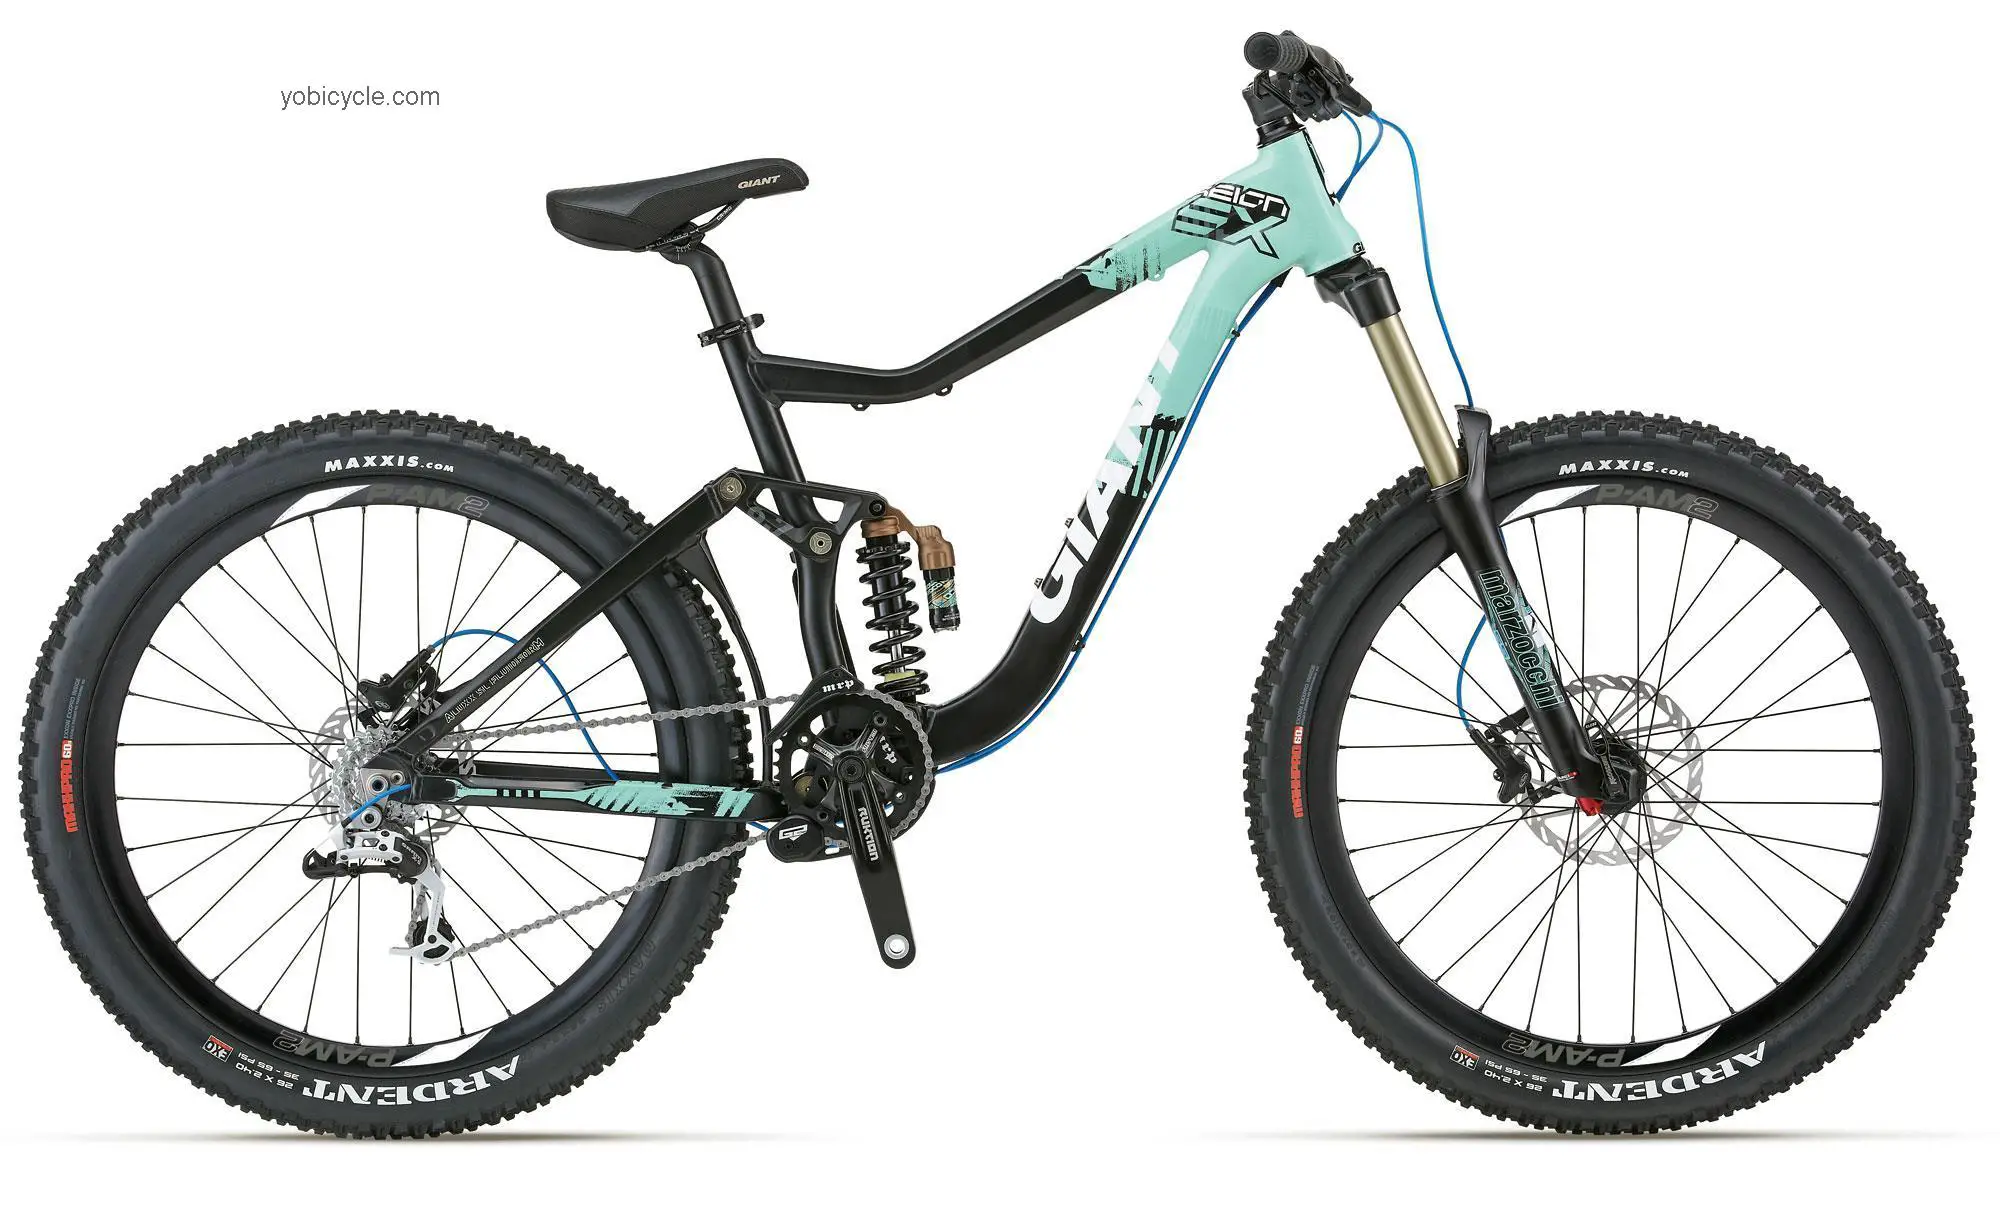 Giant Reign SX competitors and comparison tool online specs and performance